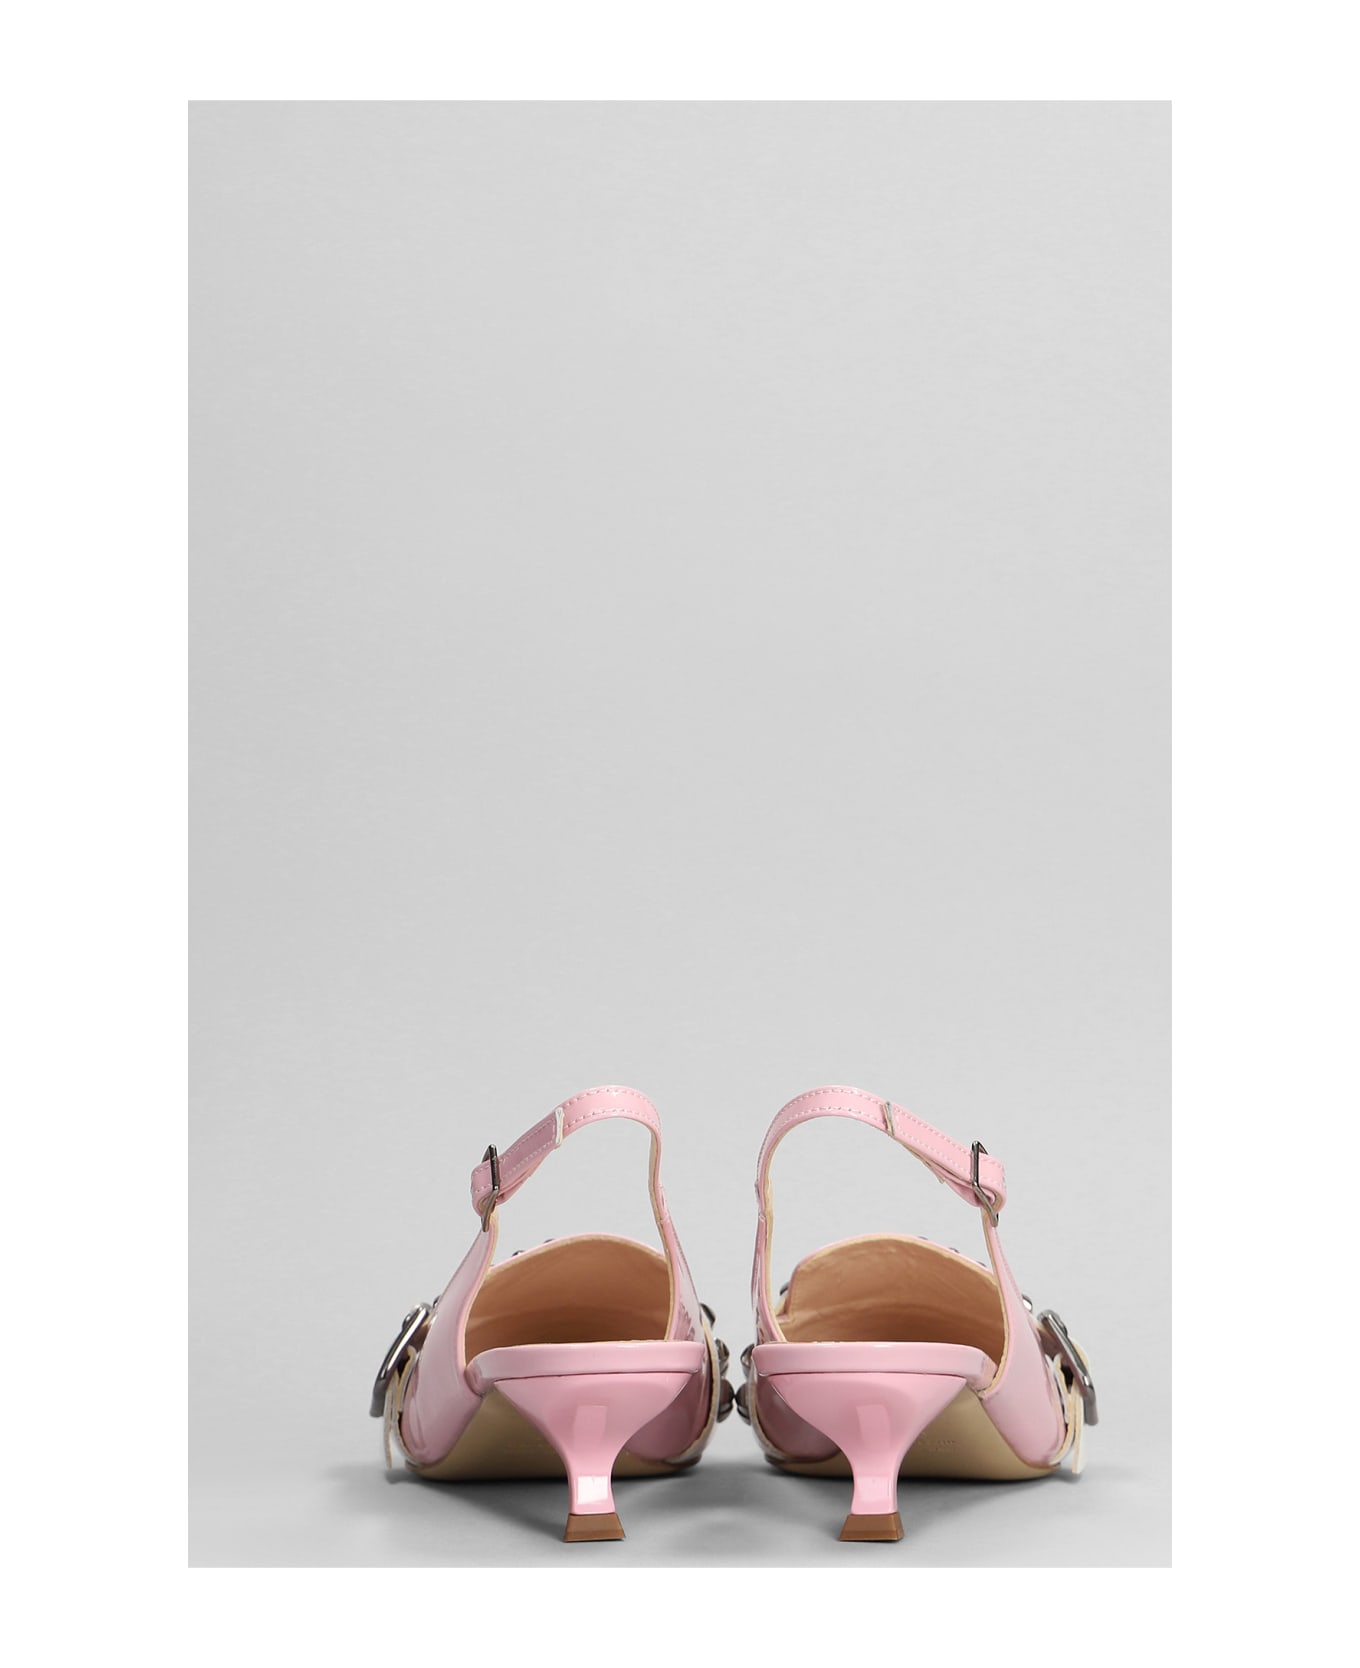 Alchimia Pumps In Rose-pink Patent Leather - rose-pink